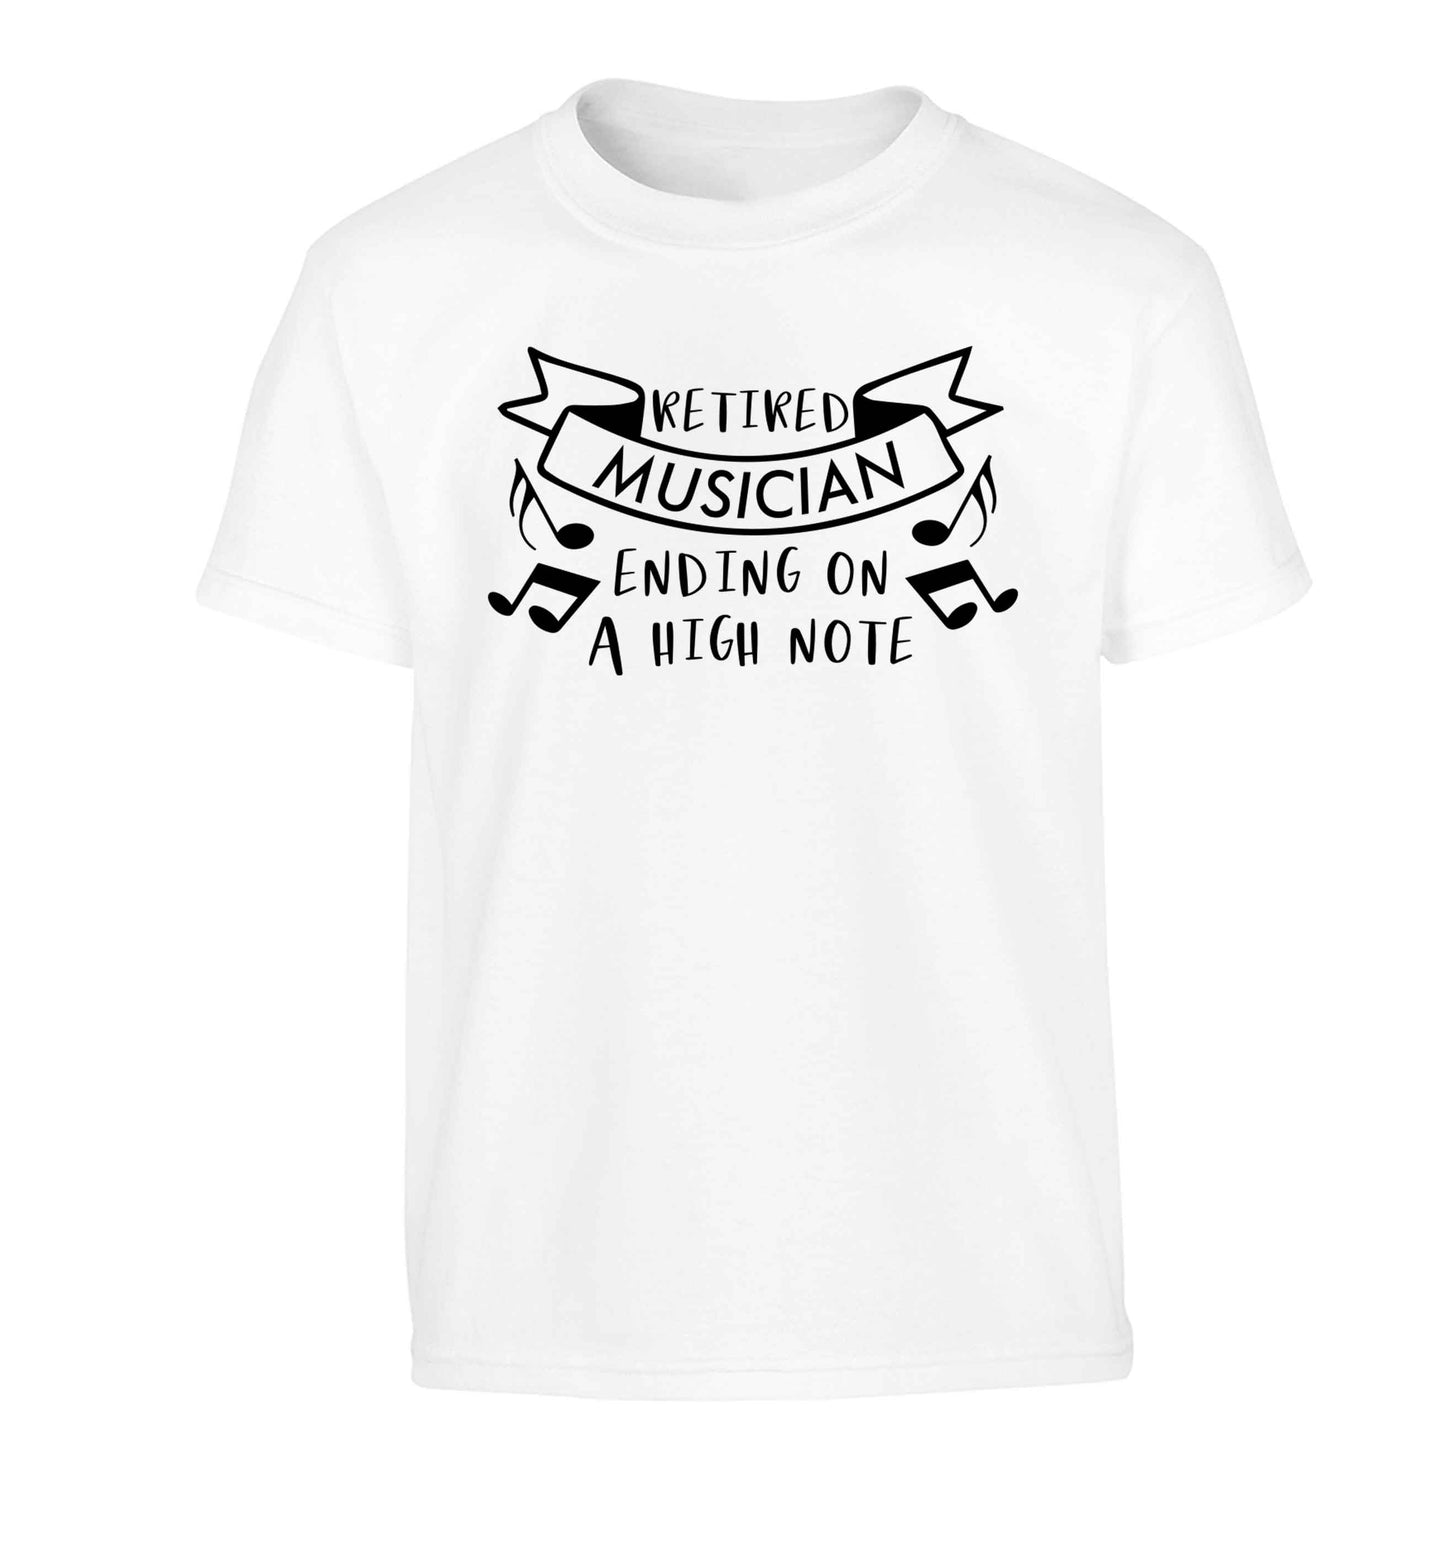 Retired musician ending on a high note Children's white Tshirt 12-13 Years